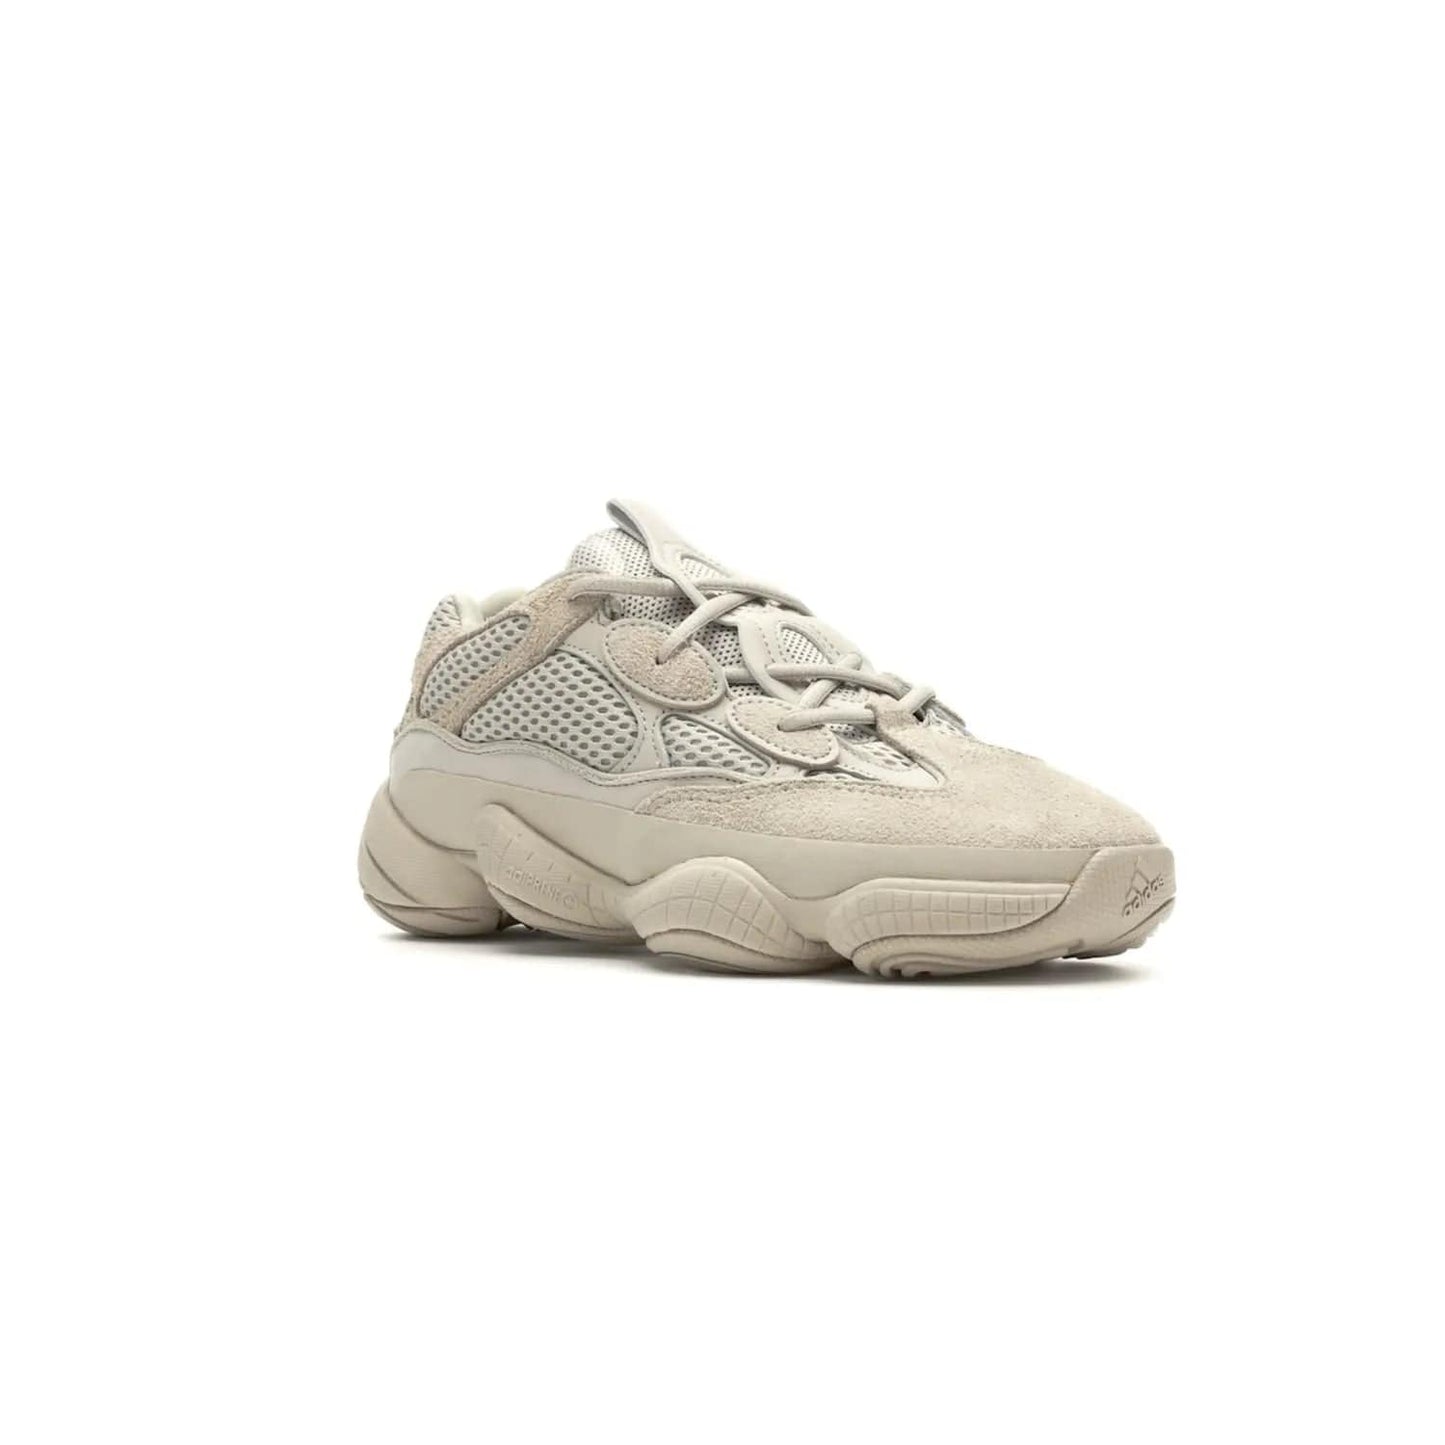 adidas Yeezy 500 Blush - Image 5 - Only at www.BallersClubKickz.com - Step up your sneaker game with the Adidas Yeezy 500 Blush. Monochromatic pale pink palette, hiking-inspired suede/mesh construction, plus adiPRENE sole for comfort and performance. Get the Adidas Yeezy 500 and experience true style and comfort.